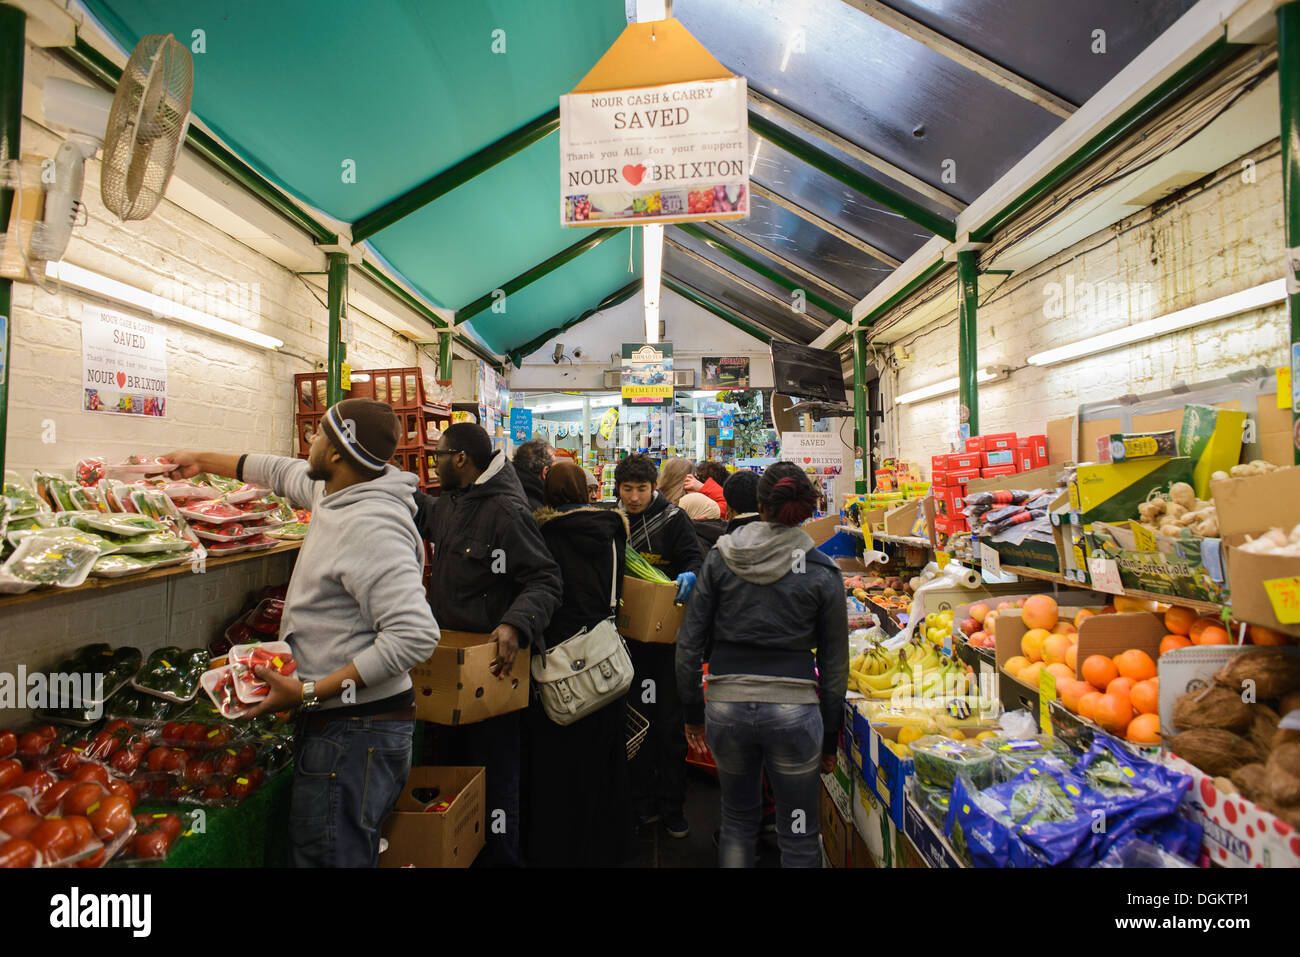 Customers shopping for produce in a crowded aisle at Nour Cash And Carry supermarket in Brixton Market. Stock Photo